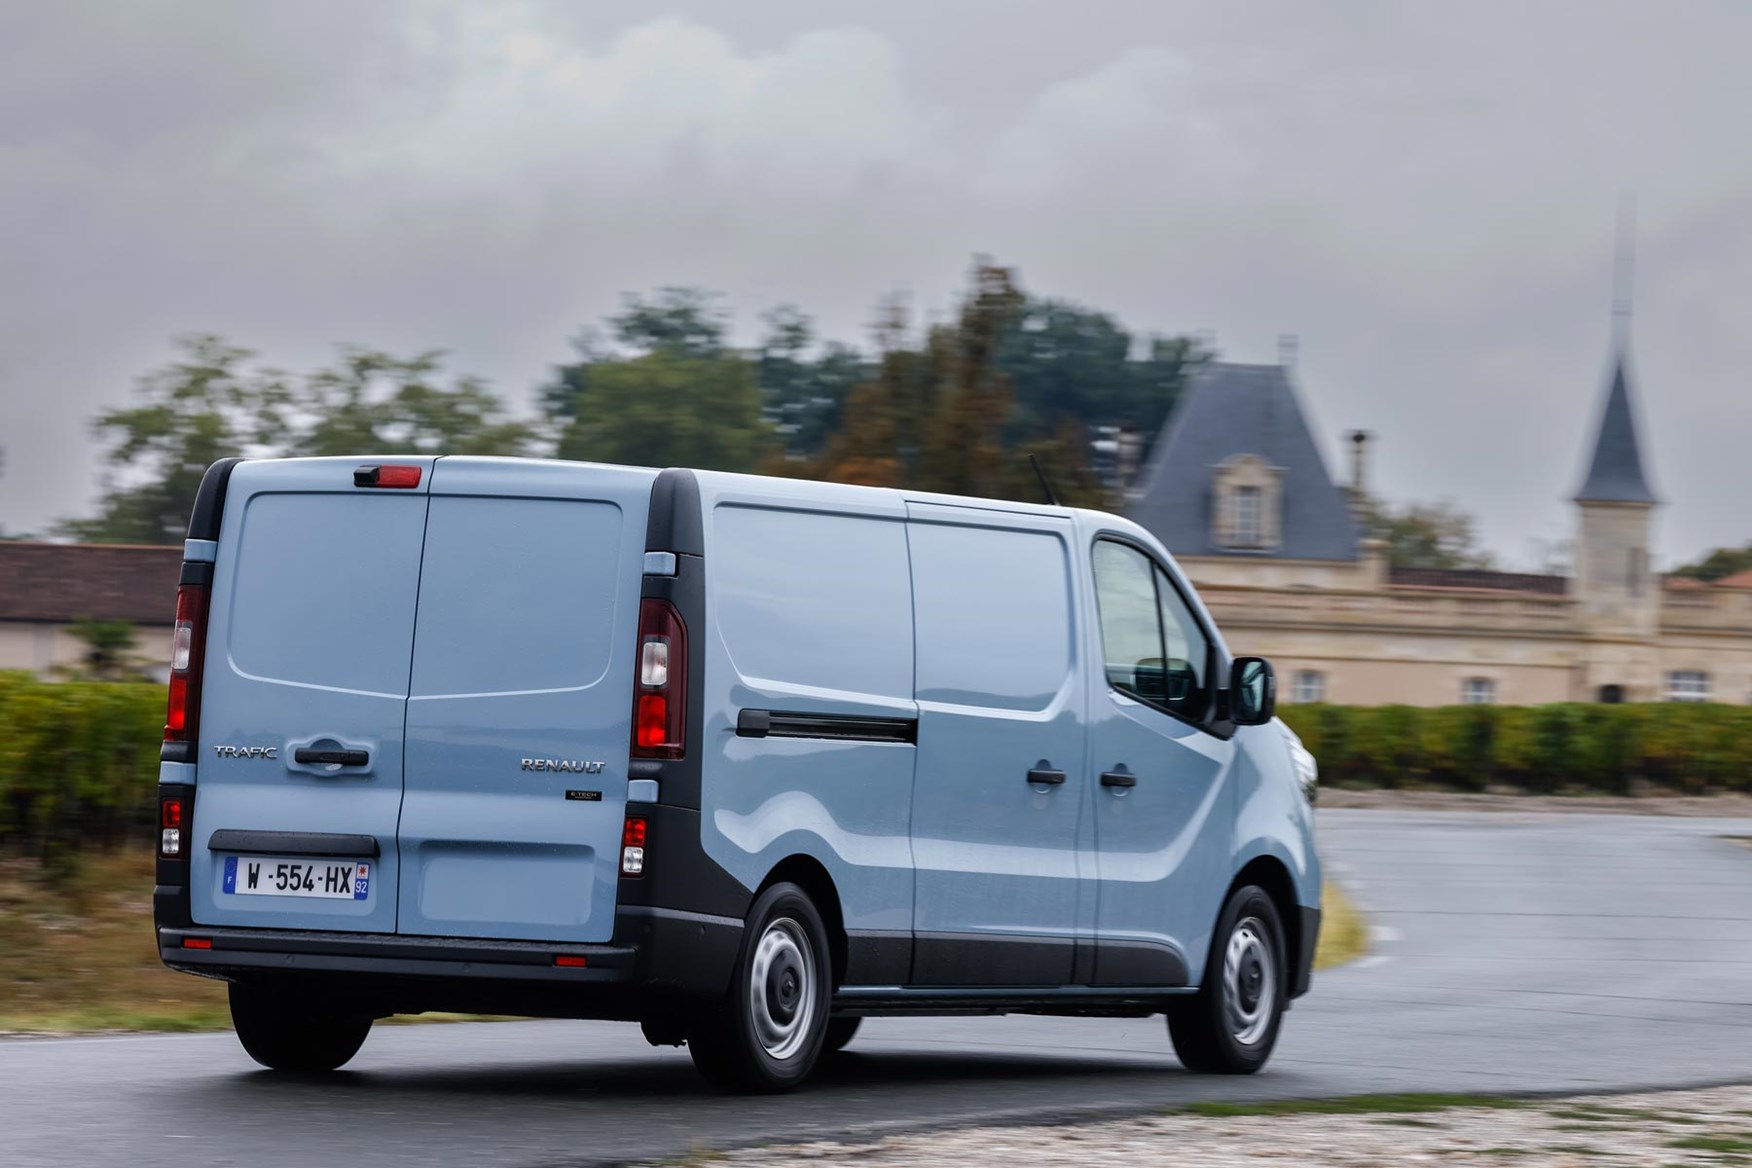 There is a choice of height and length for the Renault Trafic E-Tech.